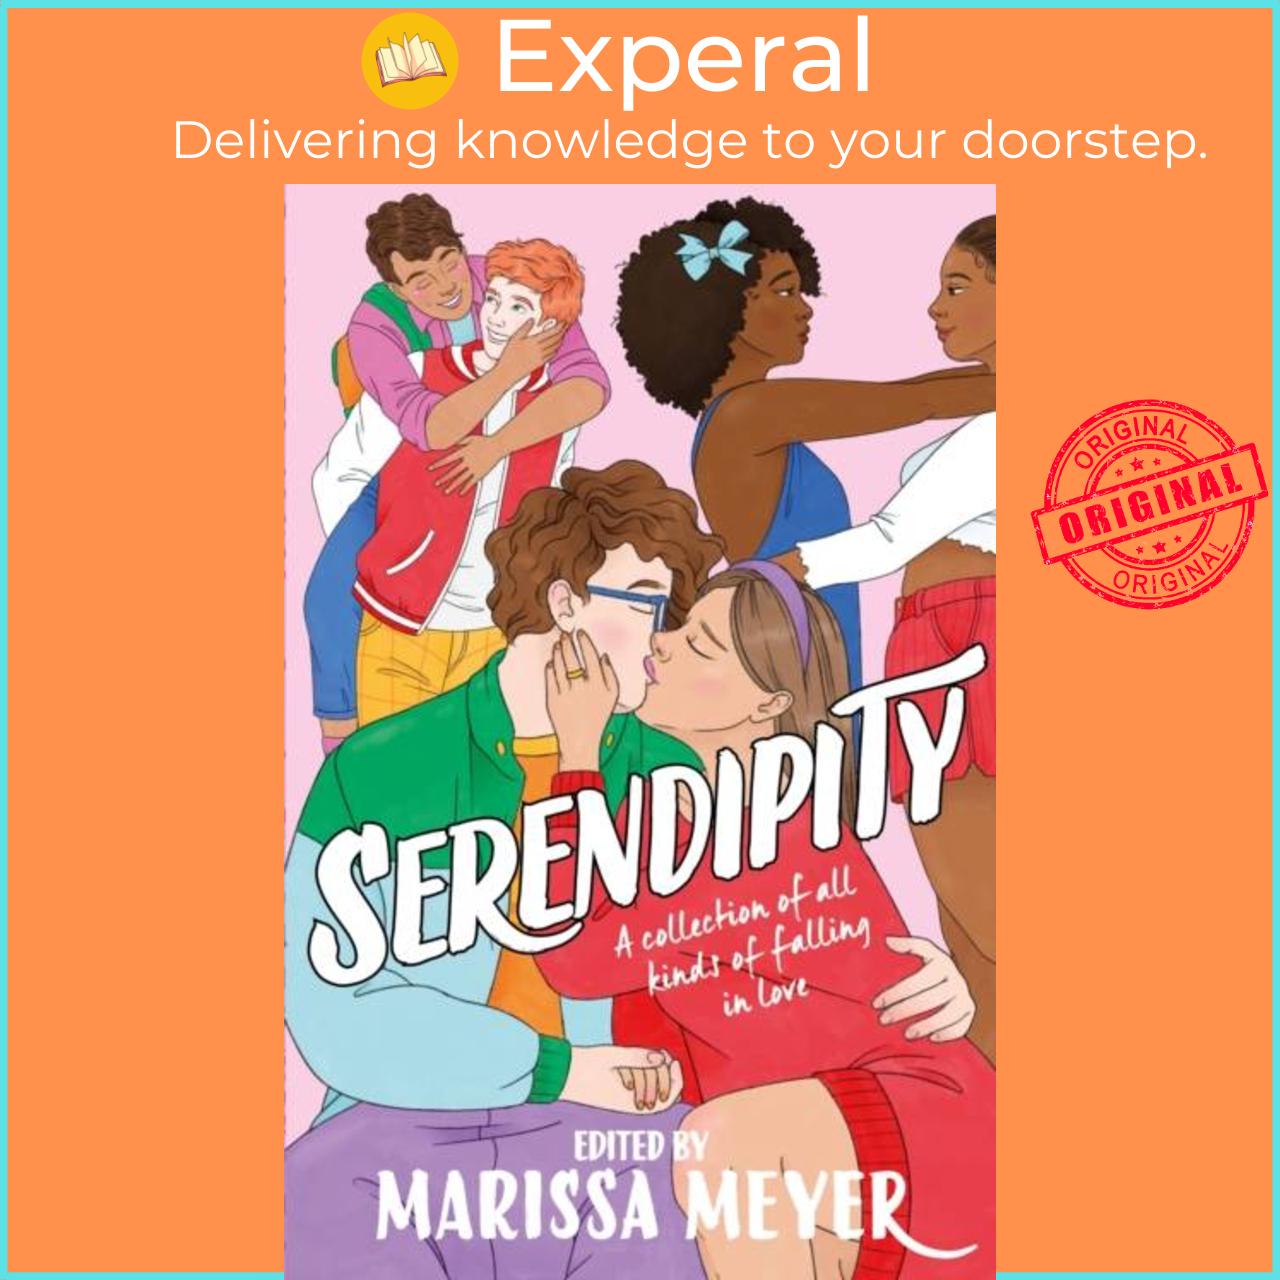 Sách - Serendipity - A gorgeous collection of stories of all kinds of falling i by Marissa Meyer (UK edition, paperback)